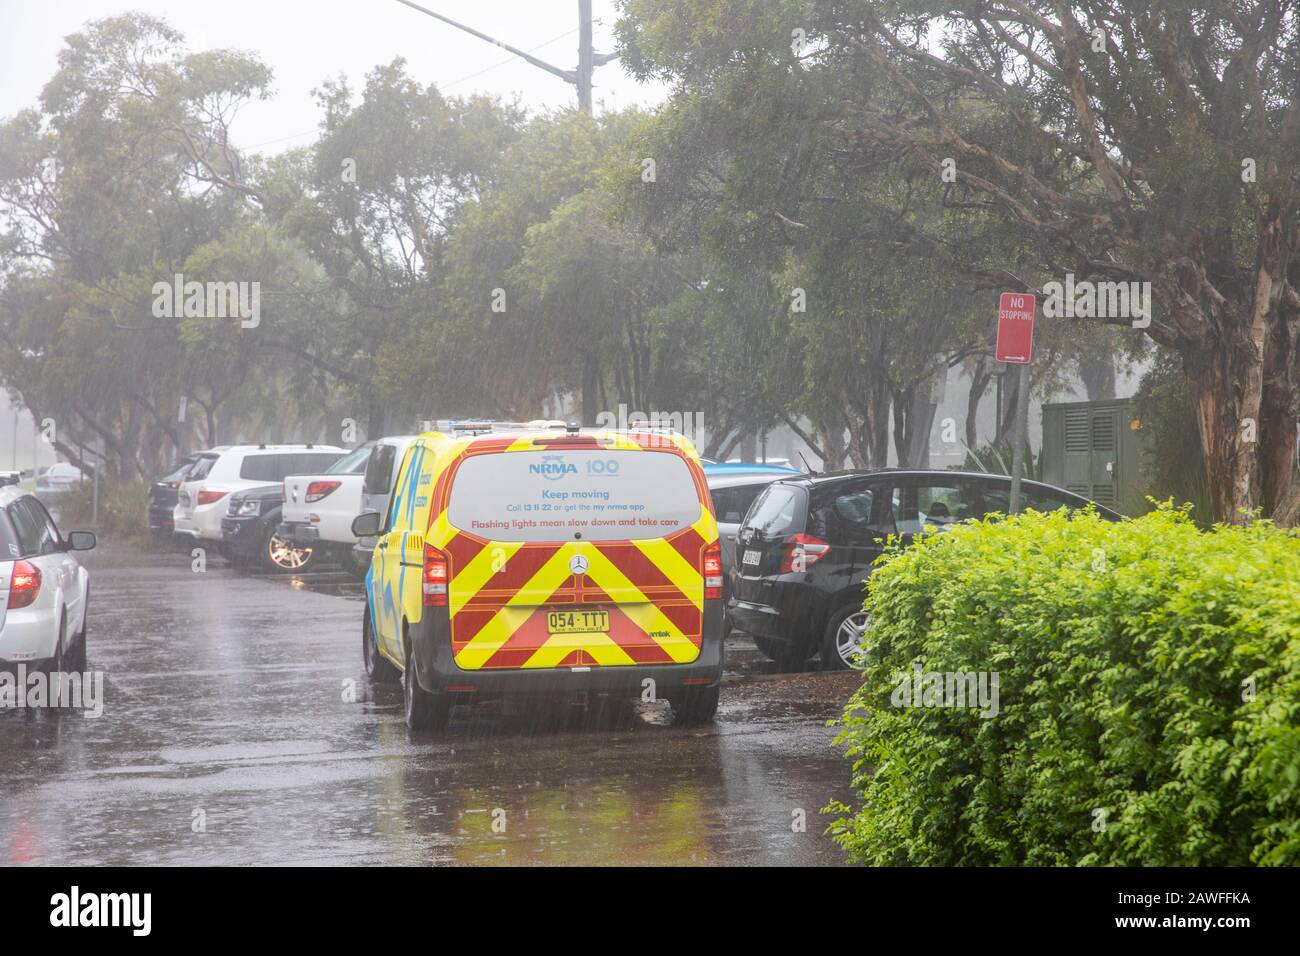 Sydney Australia, motoring association NRMA attends to a car breakdown in Avalon Beach during the february storms,Australia Stock Photo